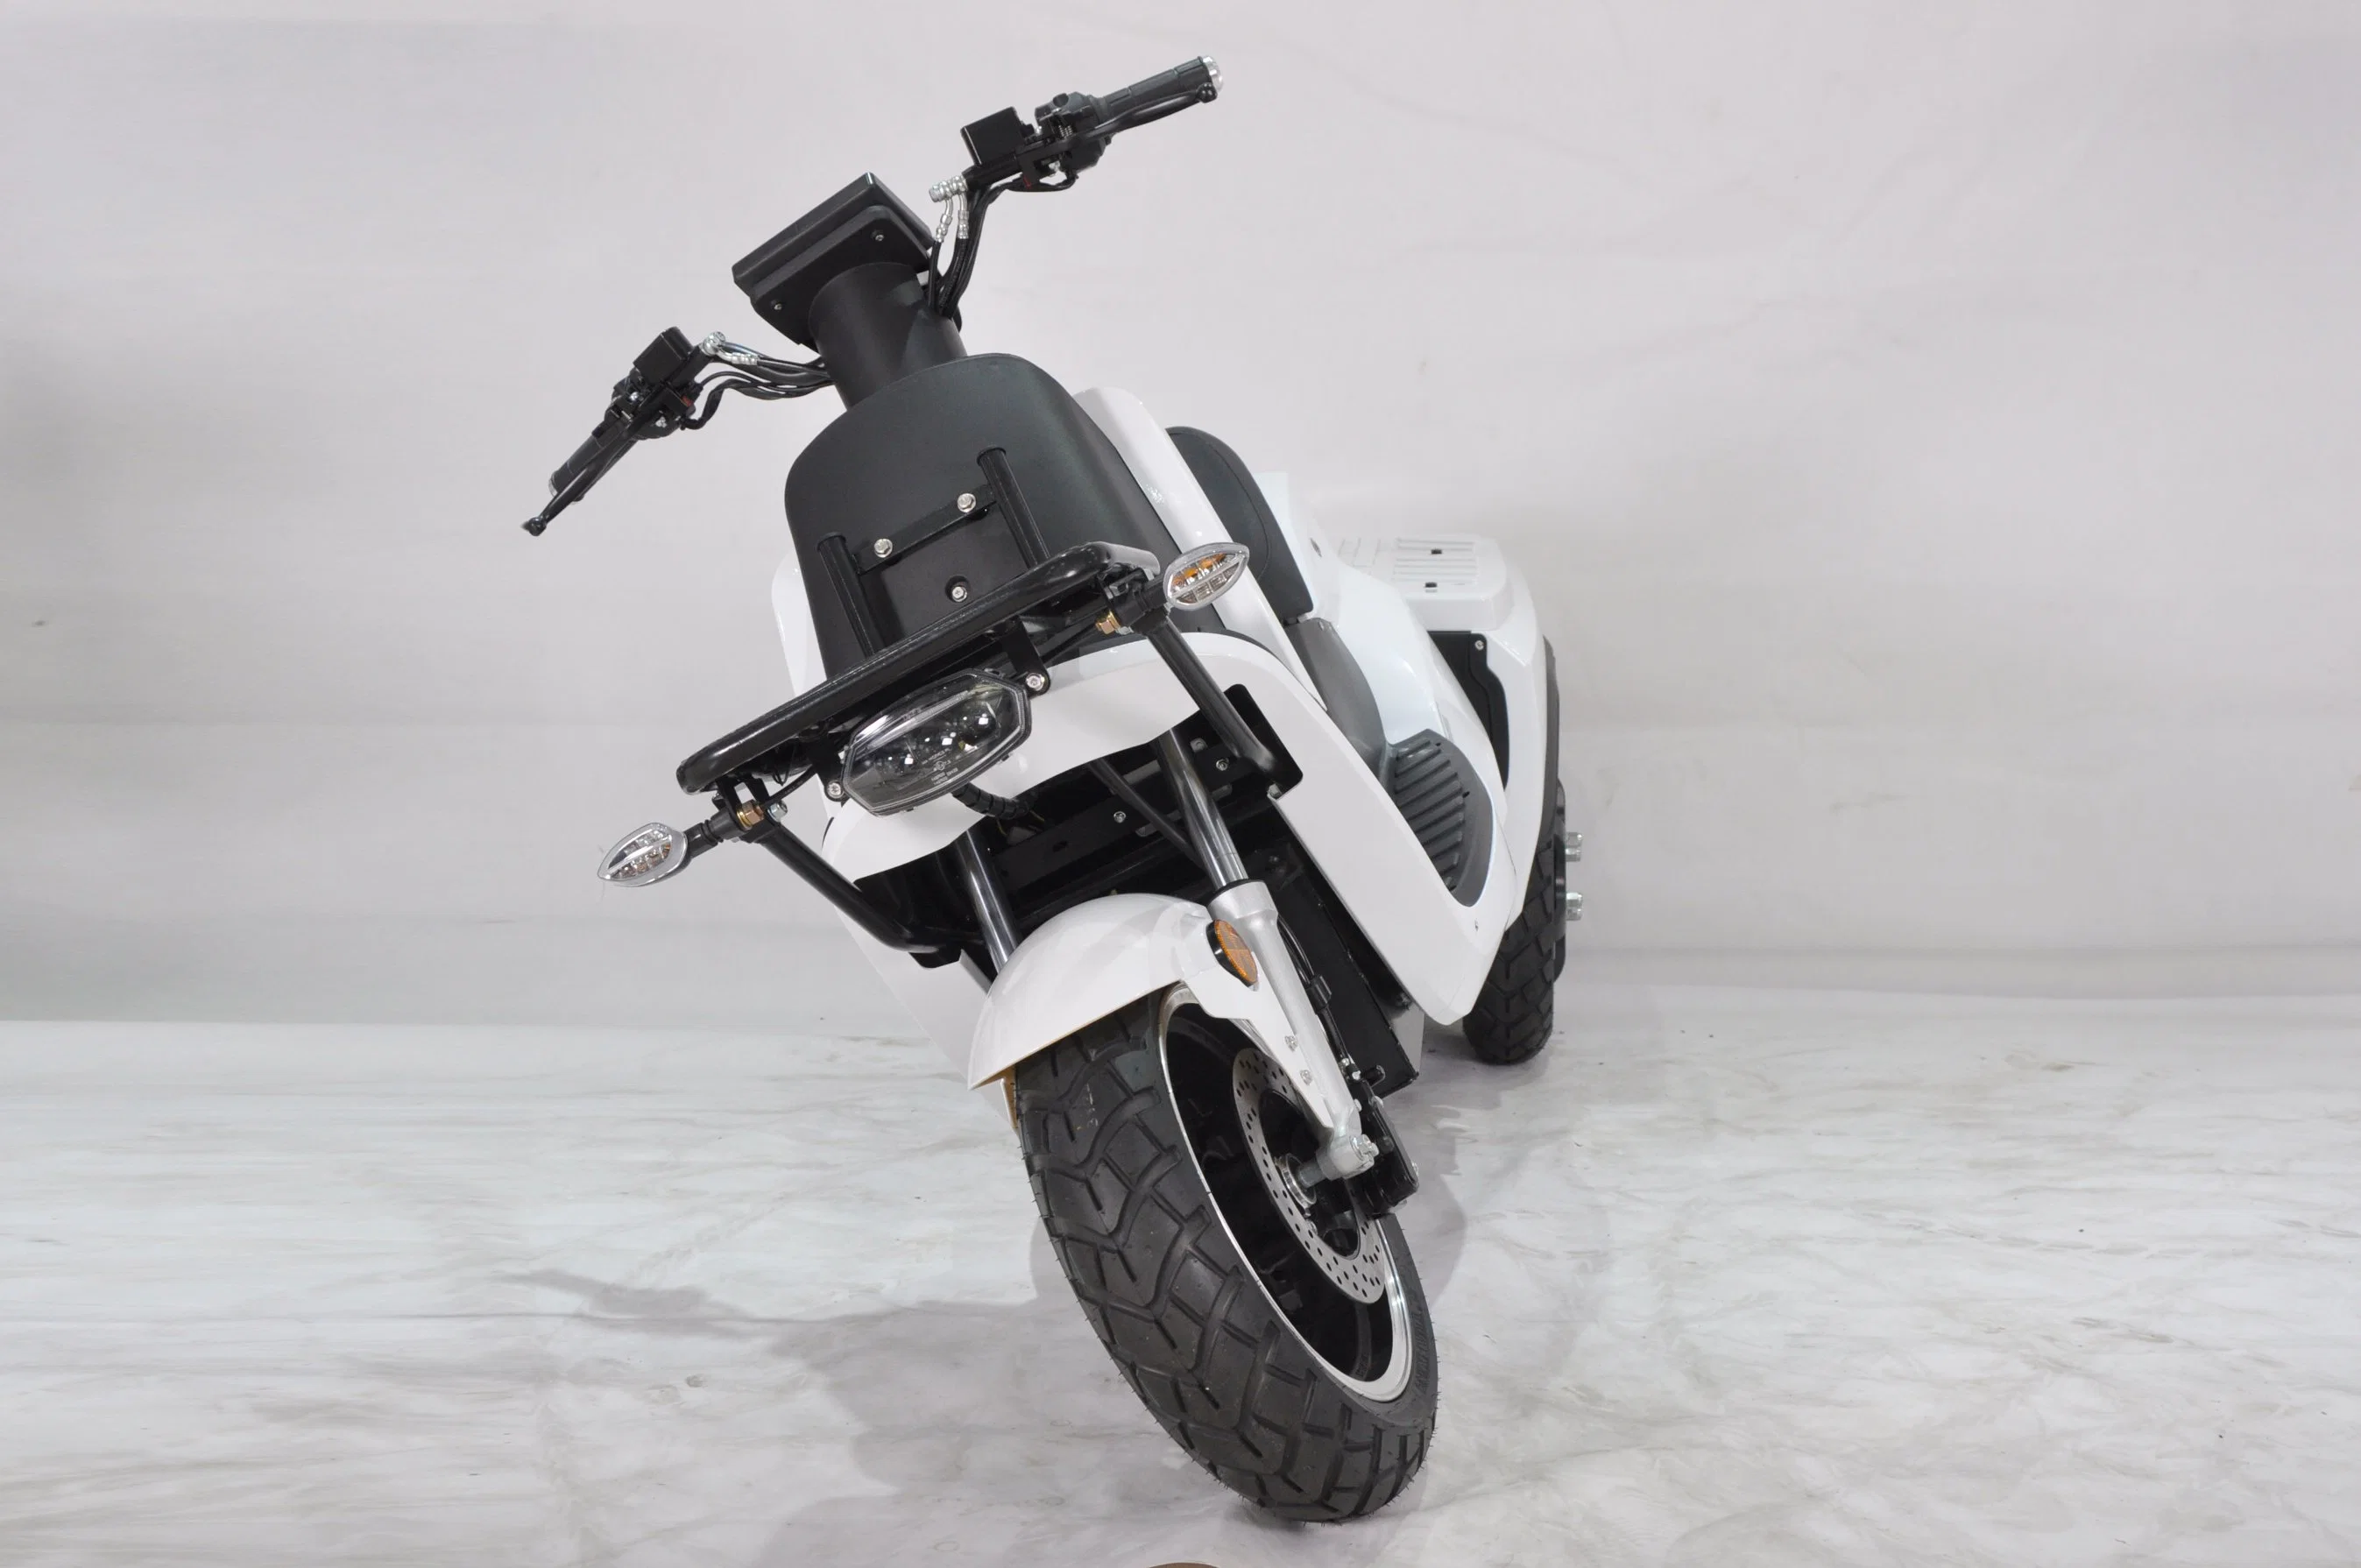 Yologo Three Wheels Delivery Motorcycle/ Electric Scooter